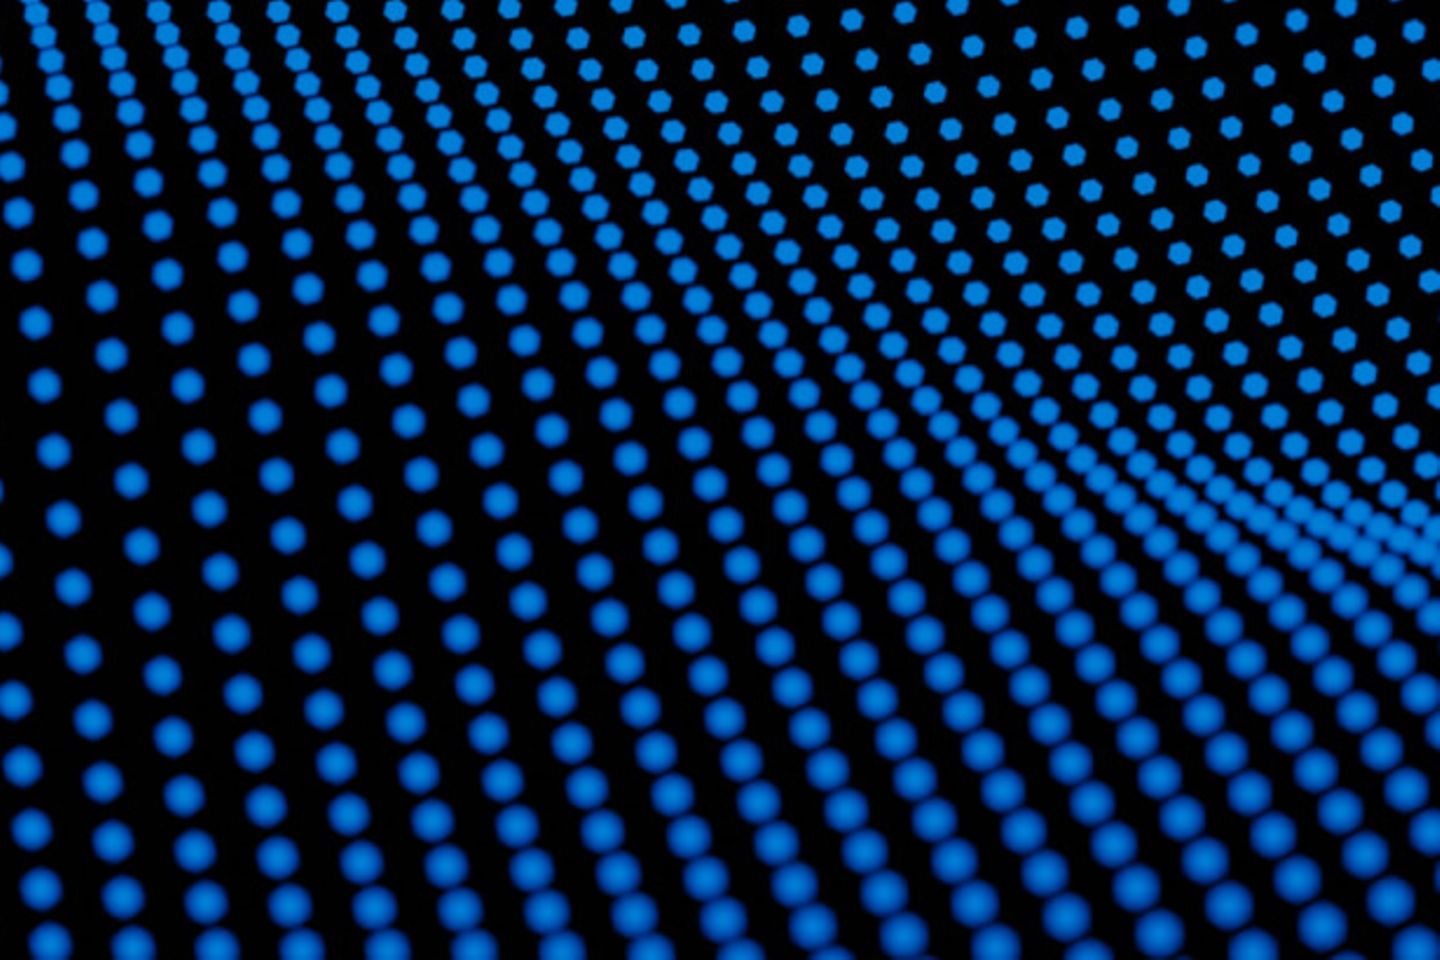 Blue Dots forming a wave on a black background